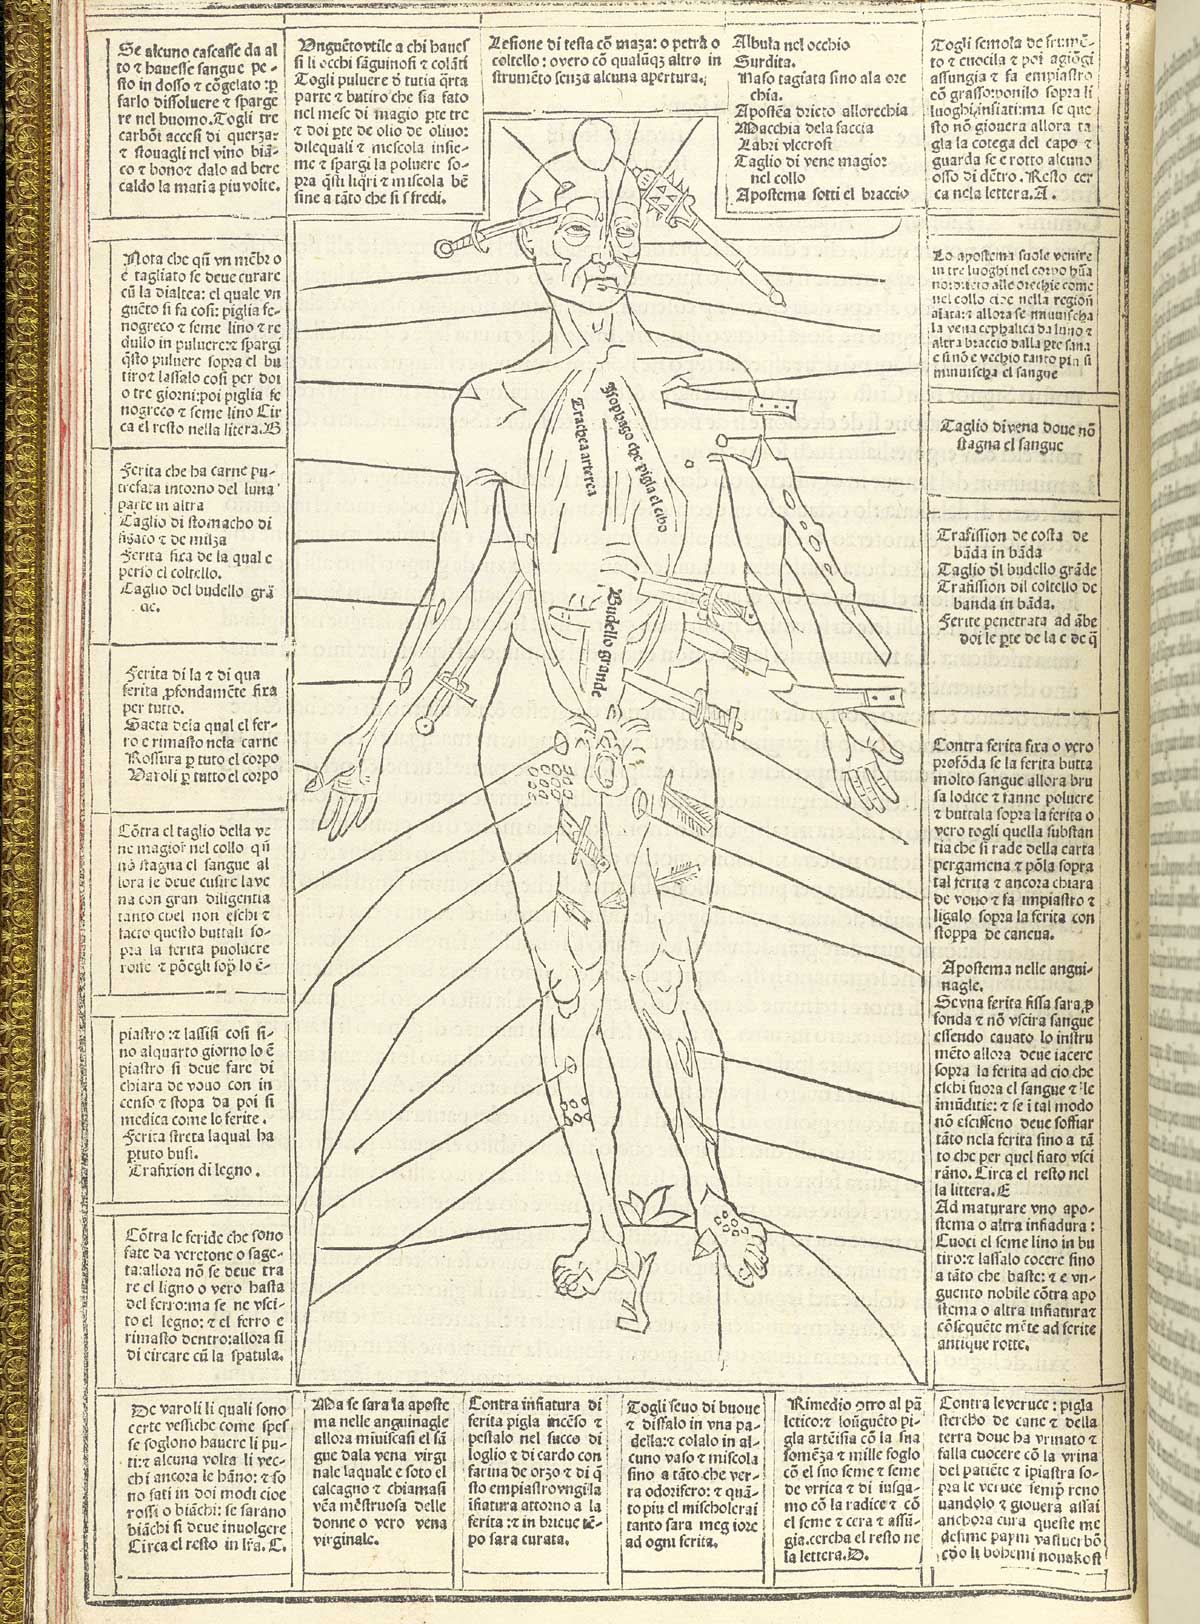 Page 24 of Johannes de Ketham's Fasiculo de medicina, featuring wound man, detailing wounds from swords, daggers, and arrows, and blows from rocks and clubs, as well as knife wounds from domestic and occupational accidents.